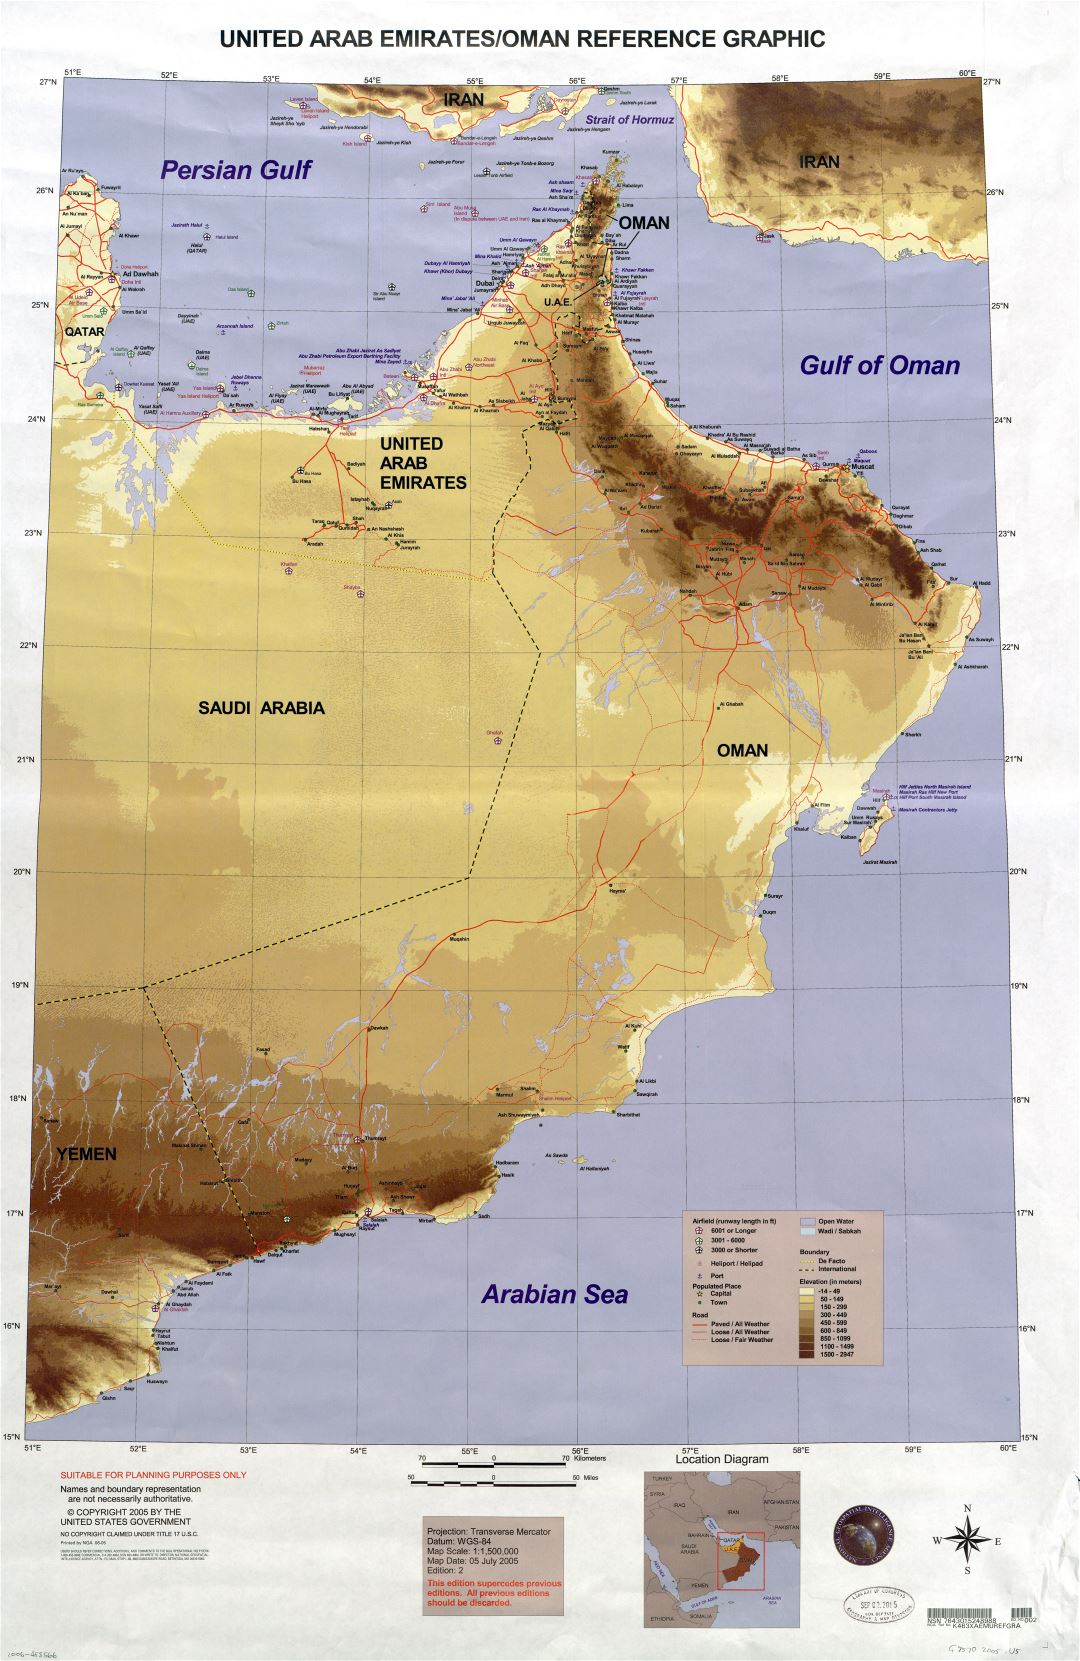 Large scale detailed United Arab Emirates and Oman reference graphic map - 2005